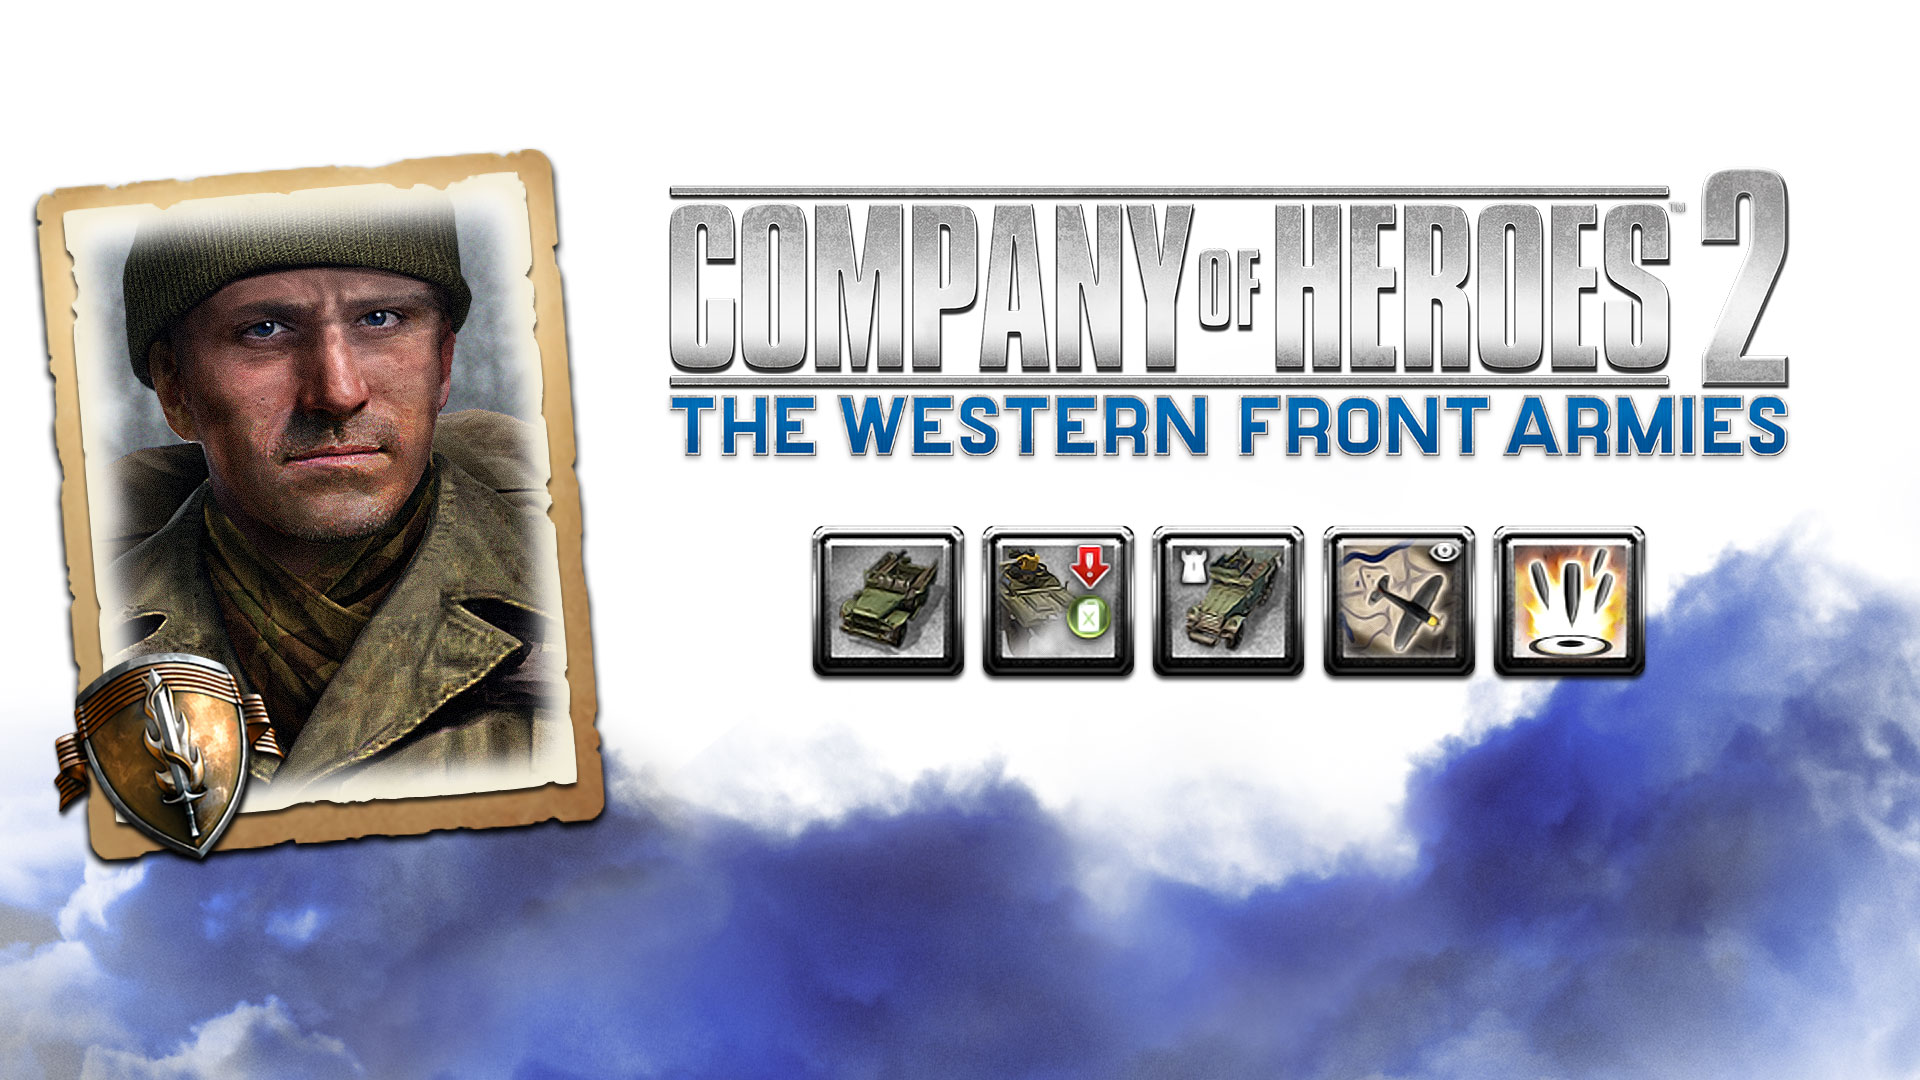 Company of Heroes 2 - US Forces Commanders Collection DLC Steam CD Key 4.17 $